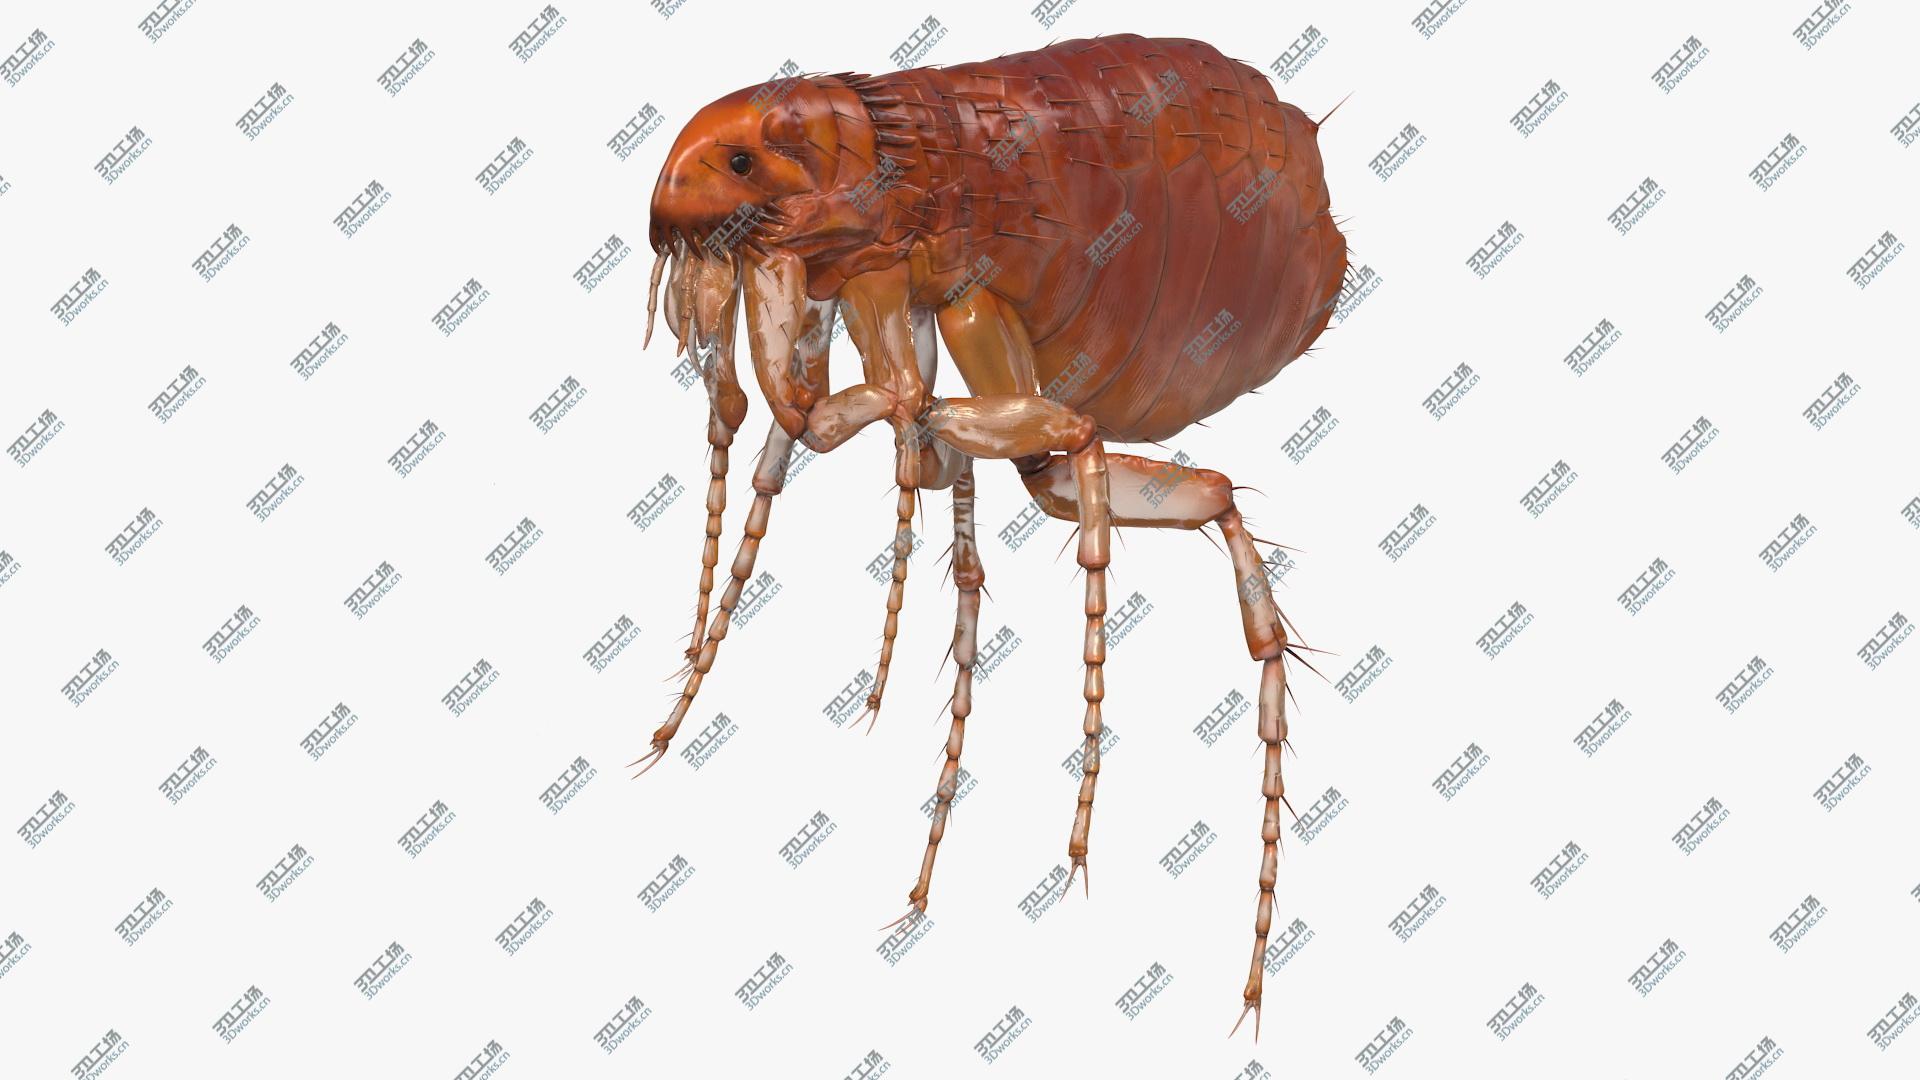 images/goods_img/202104093/3D Flea Insect Rigged model/1.jpg